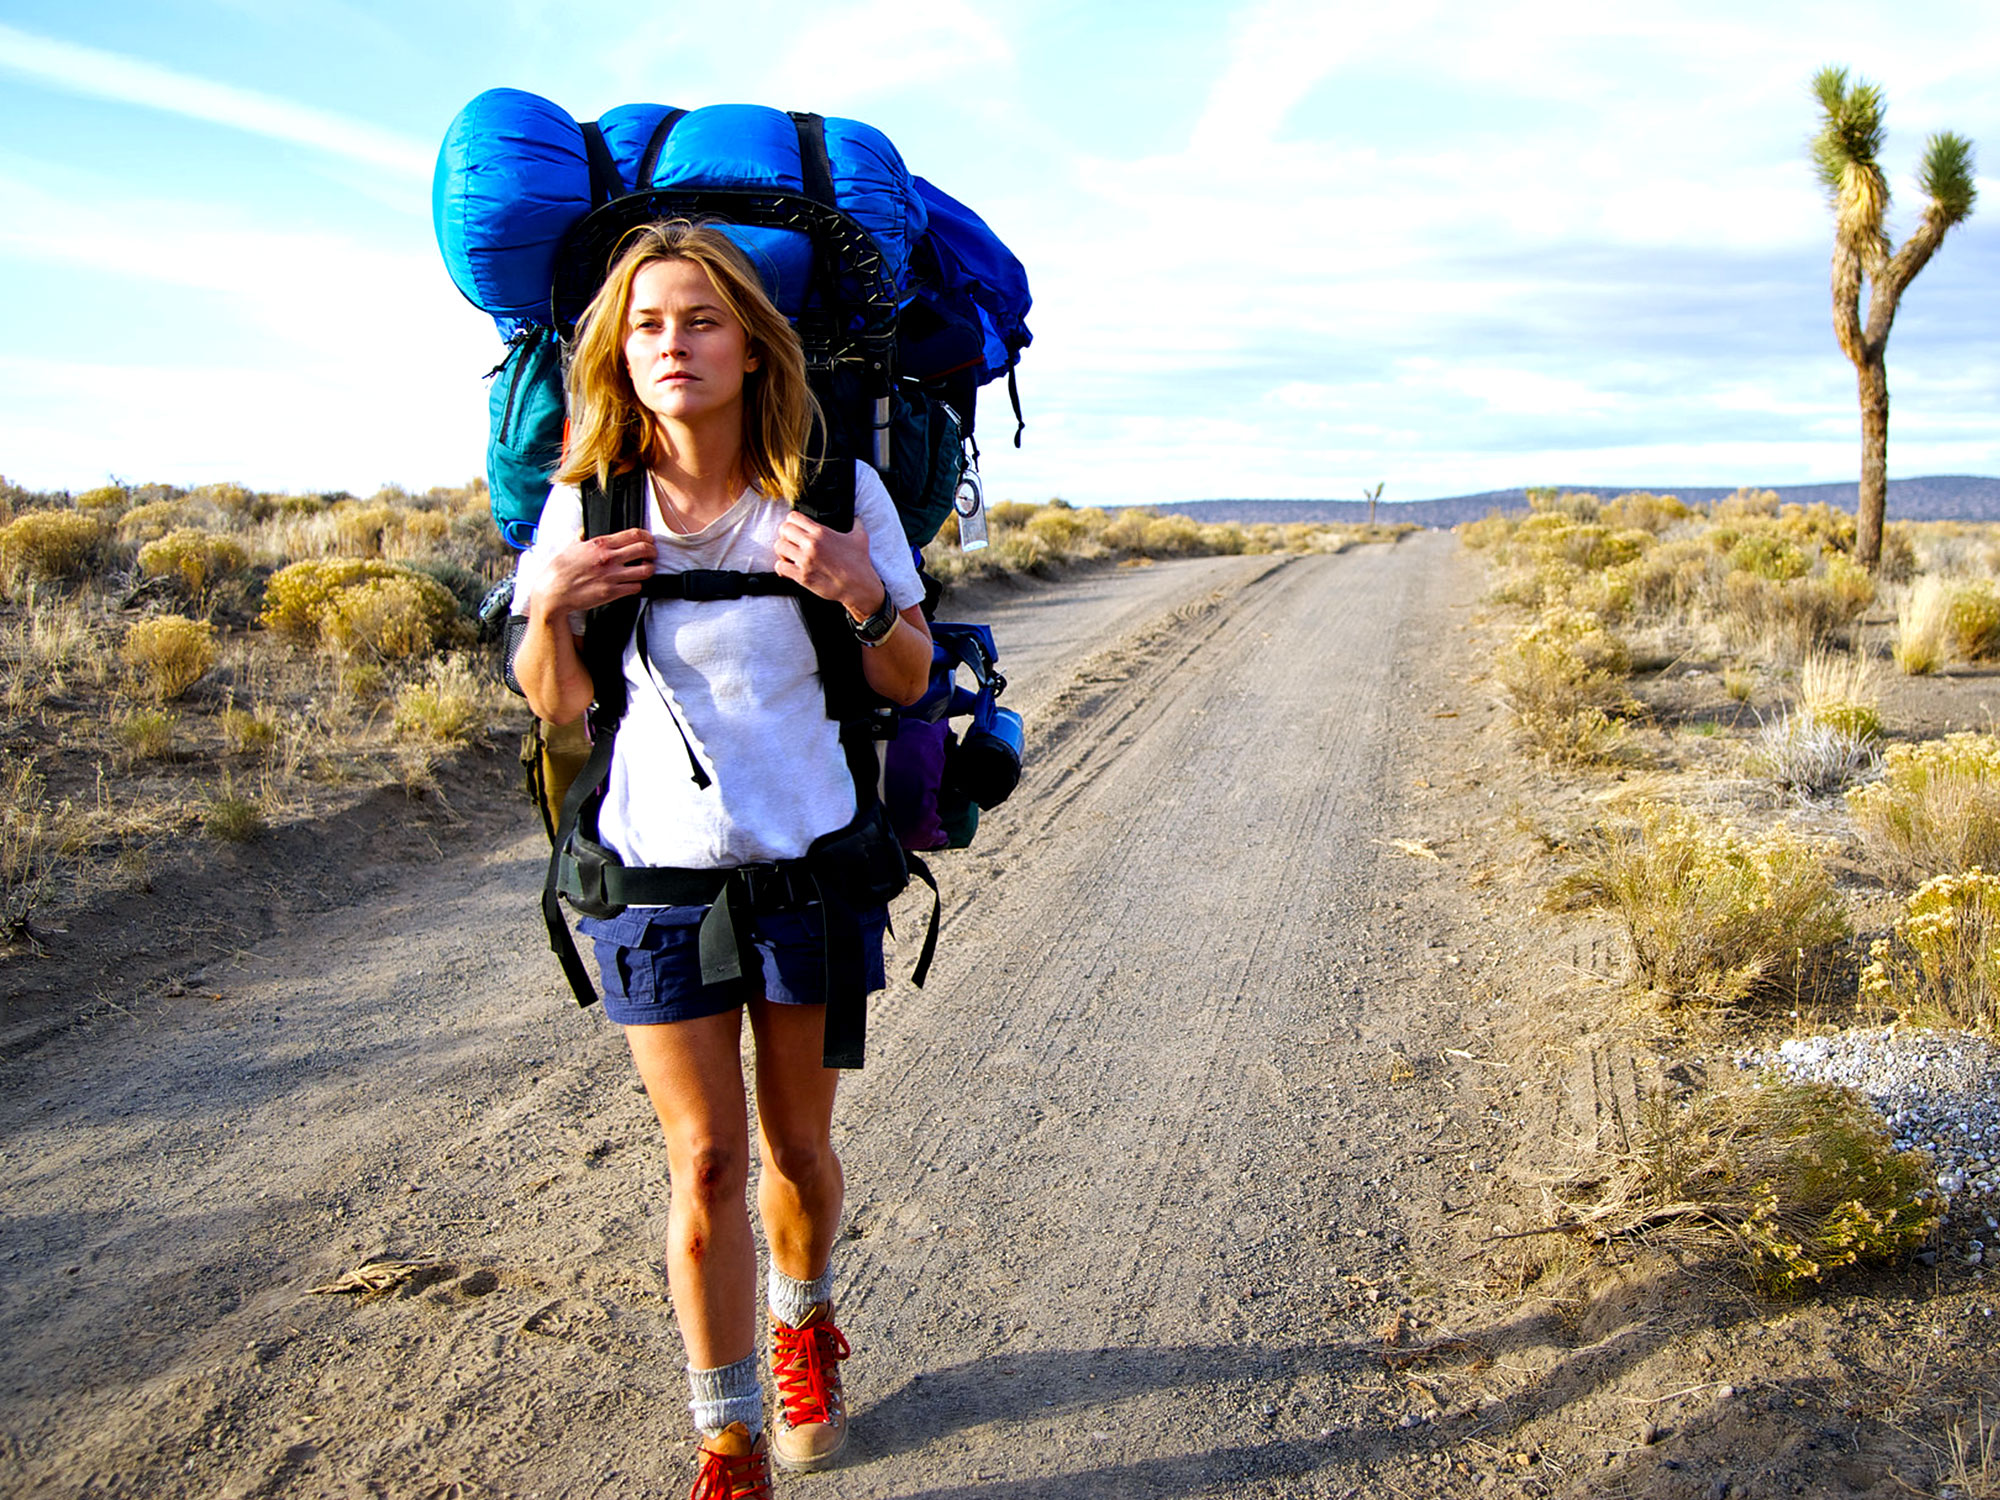 Reese Witherspoon as Cheryl Strayed in the movie Wild